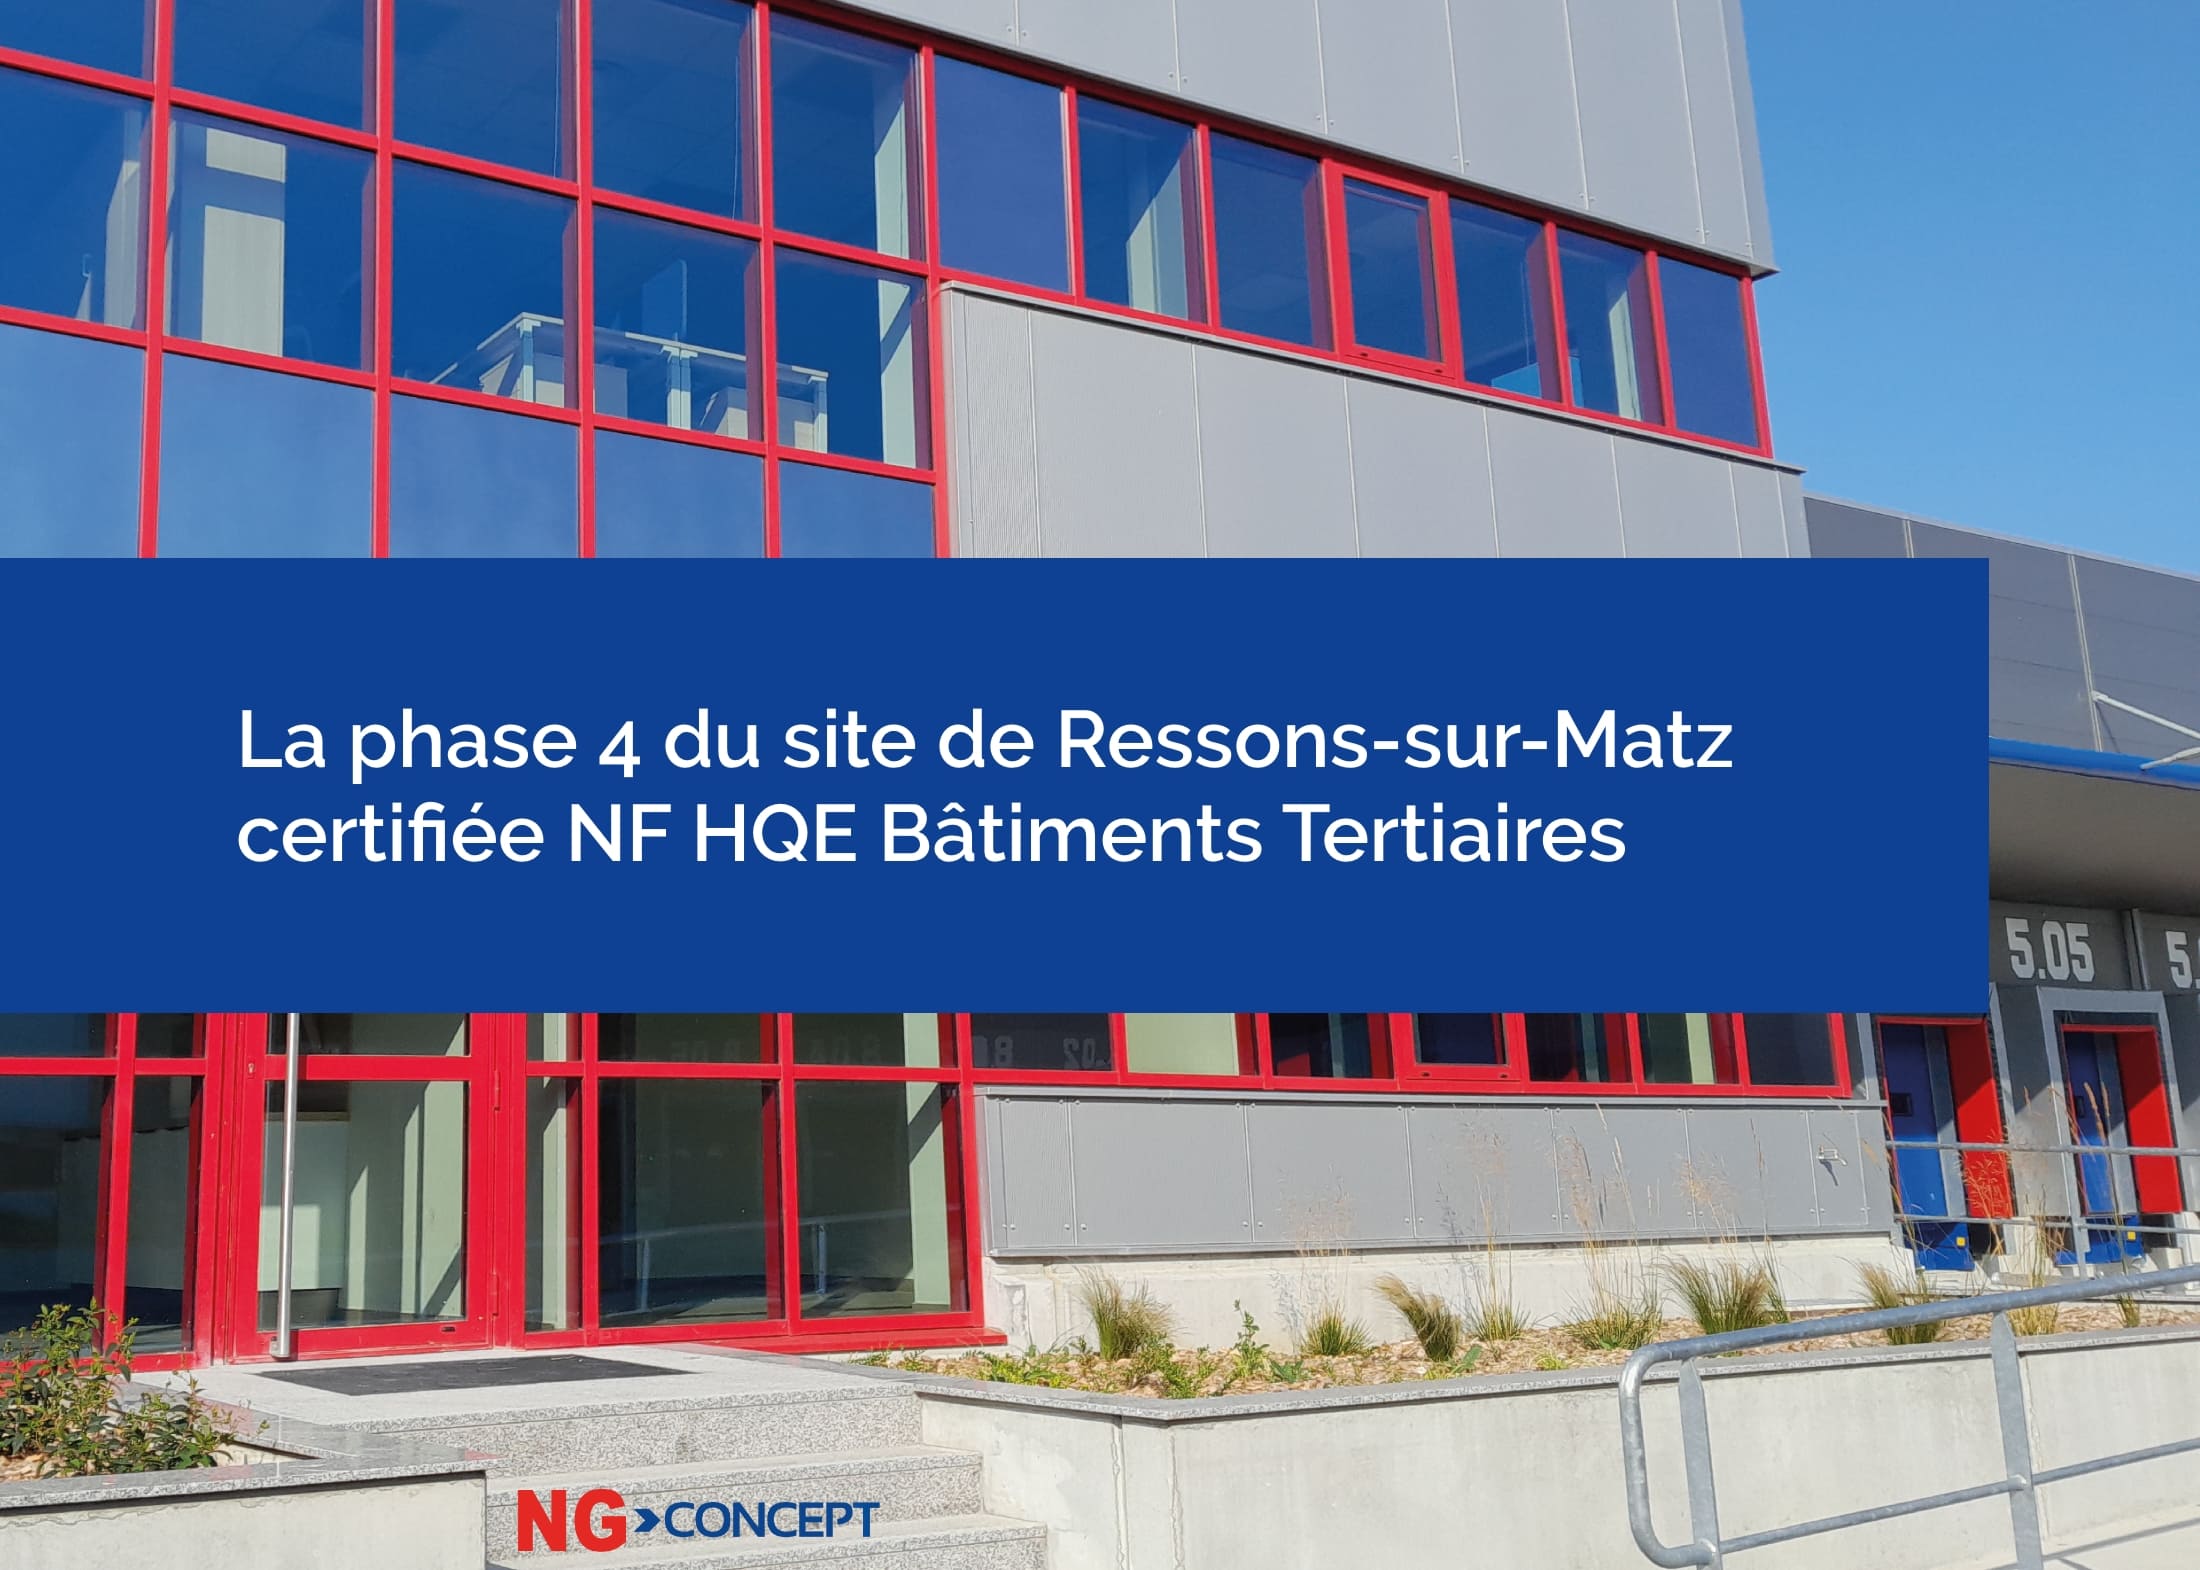 NF HQE certification of the Ressons-sur-Matz phase 4